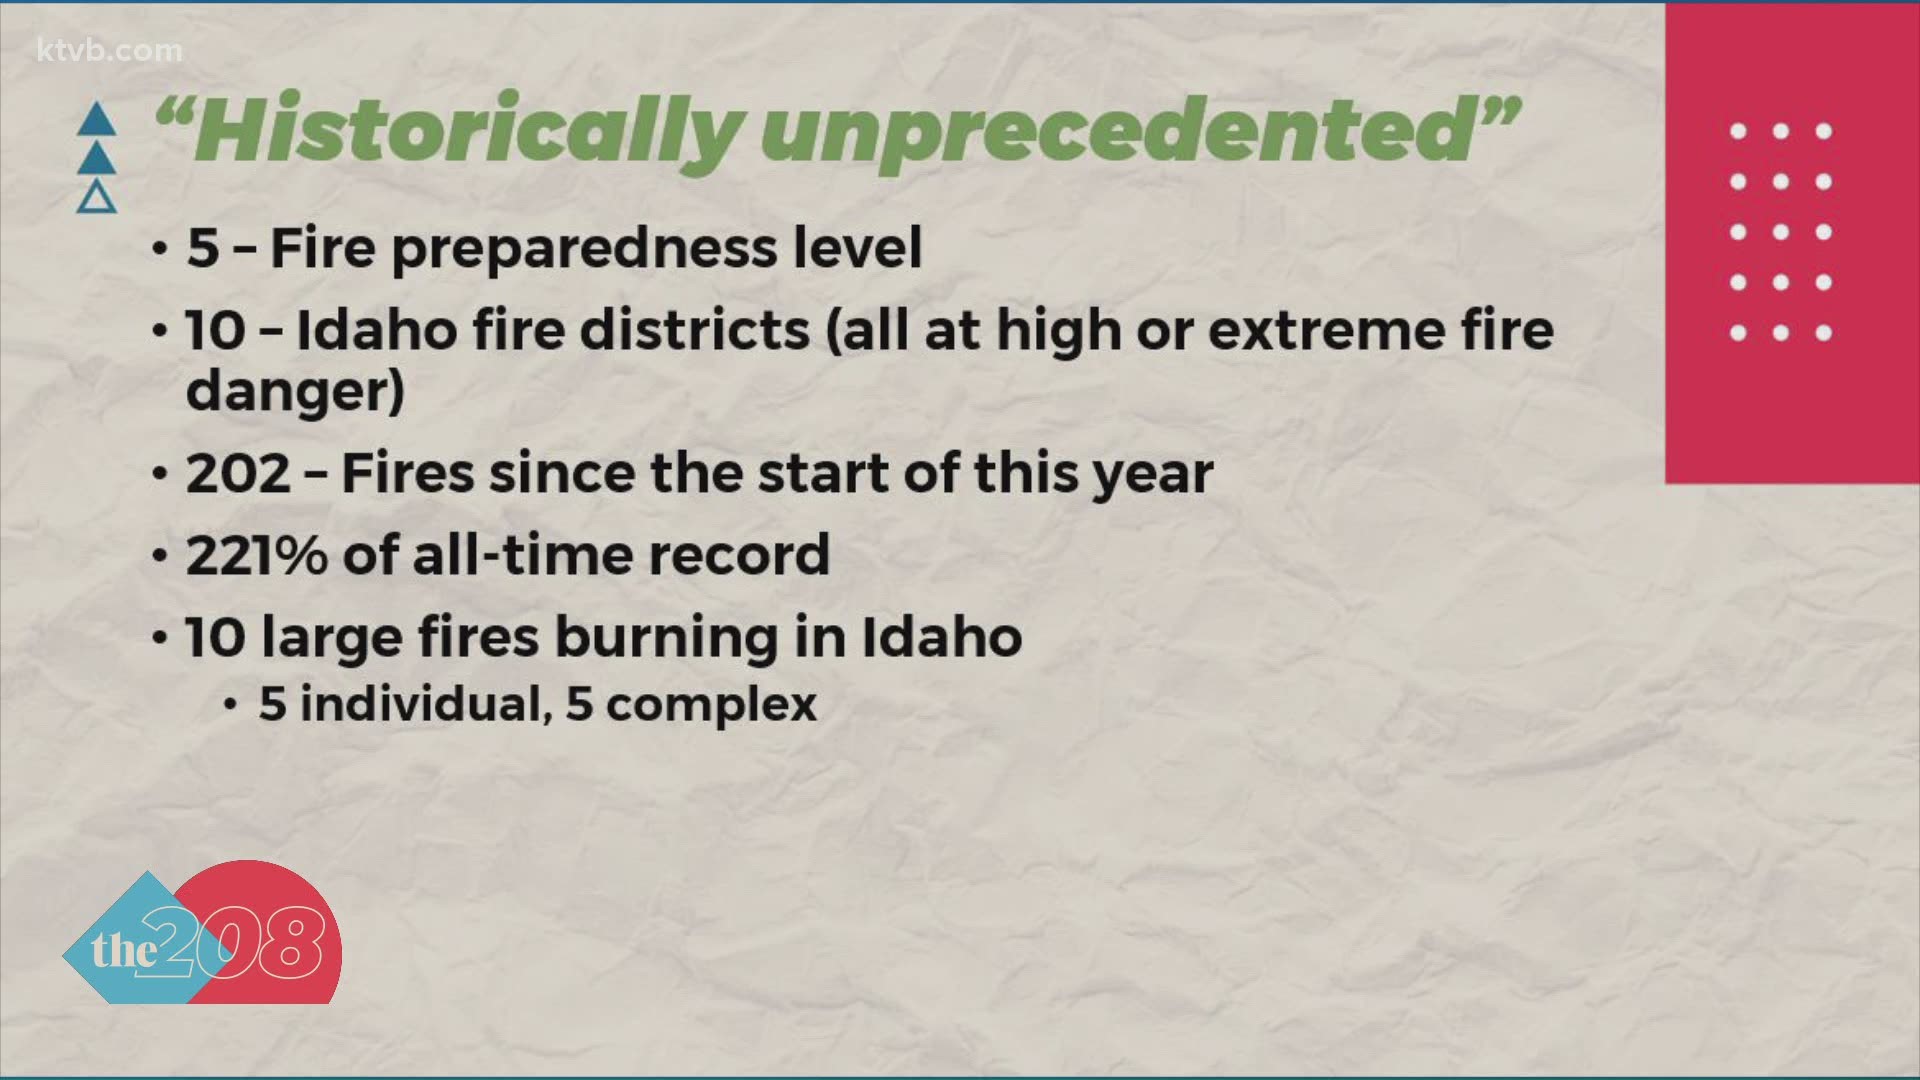 On July 9, Gov. Little issued an emergency declaration that activated some personnel of the Idaho National Guard to help fight the wildfires raging across the state.